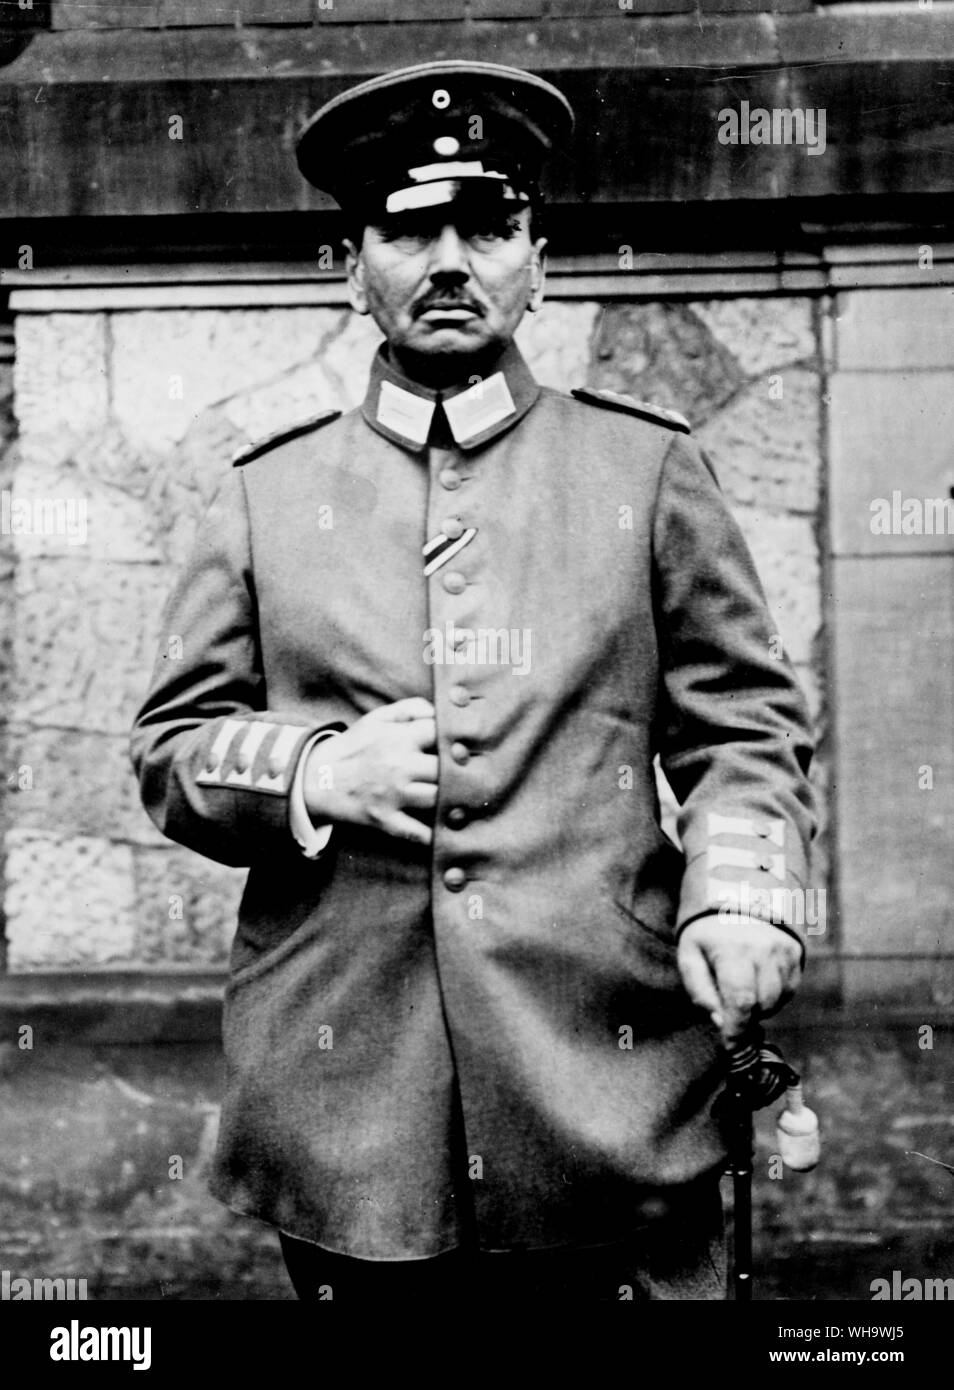 WW1/ General von Kluck on his 70th birthday. He commanded the army which attacked the British at Mons, 23rd August 1914. Wounded on March 28th 1915. Stock Photo